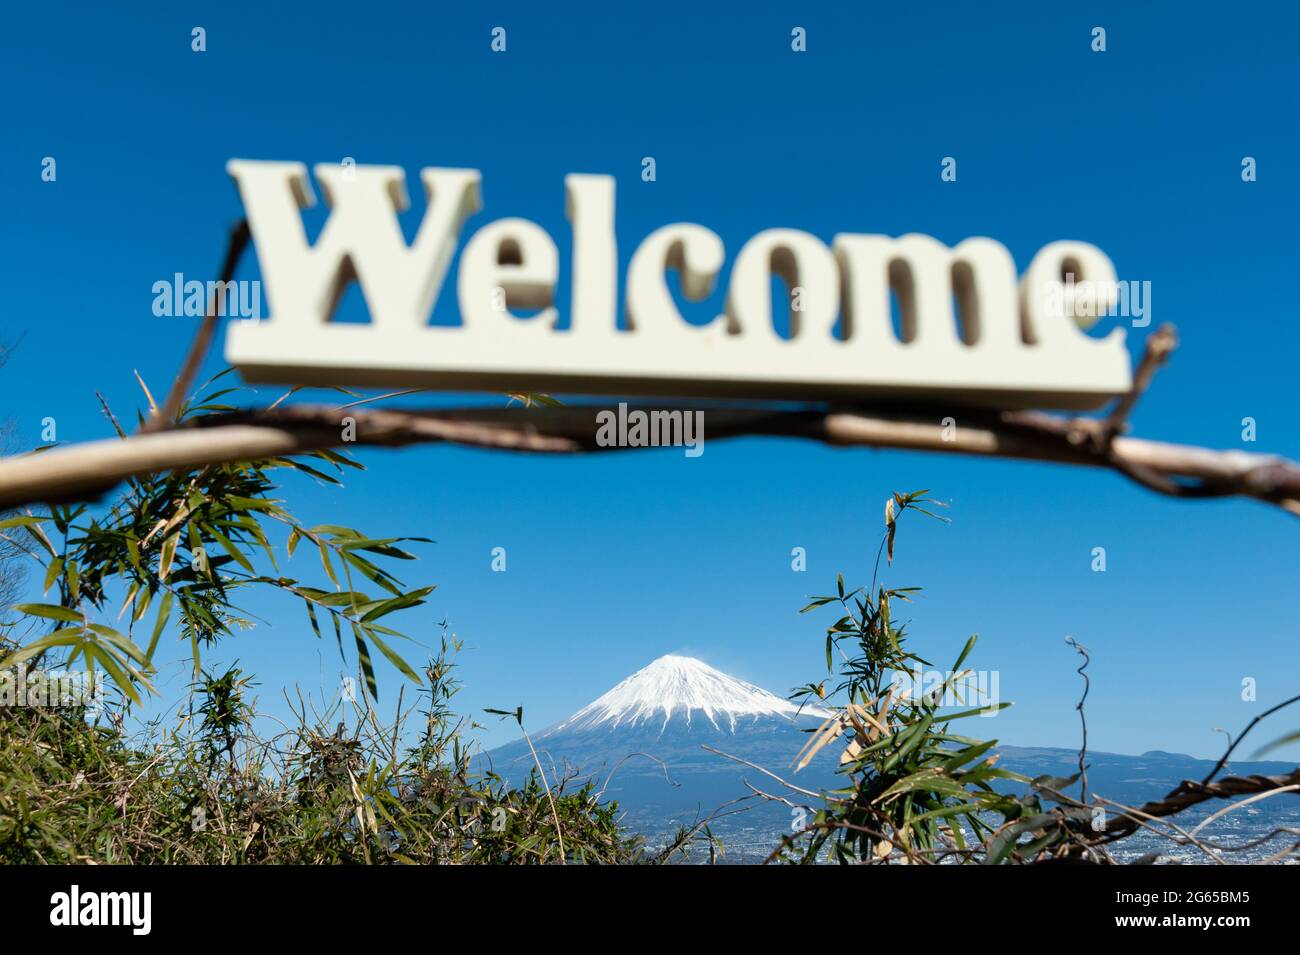 'Welcome' word written in wood. Background with Fuji City aerial view and the famous Mount Fuji with snowy peak. Stock Photo